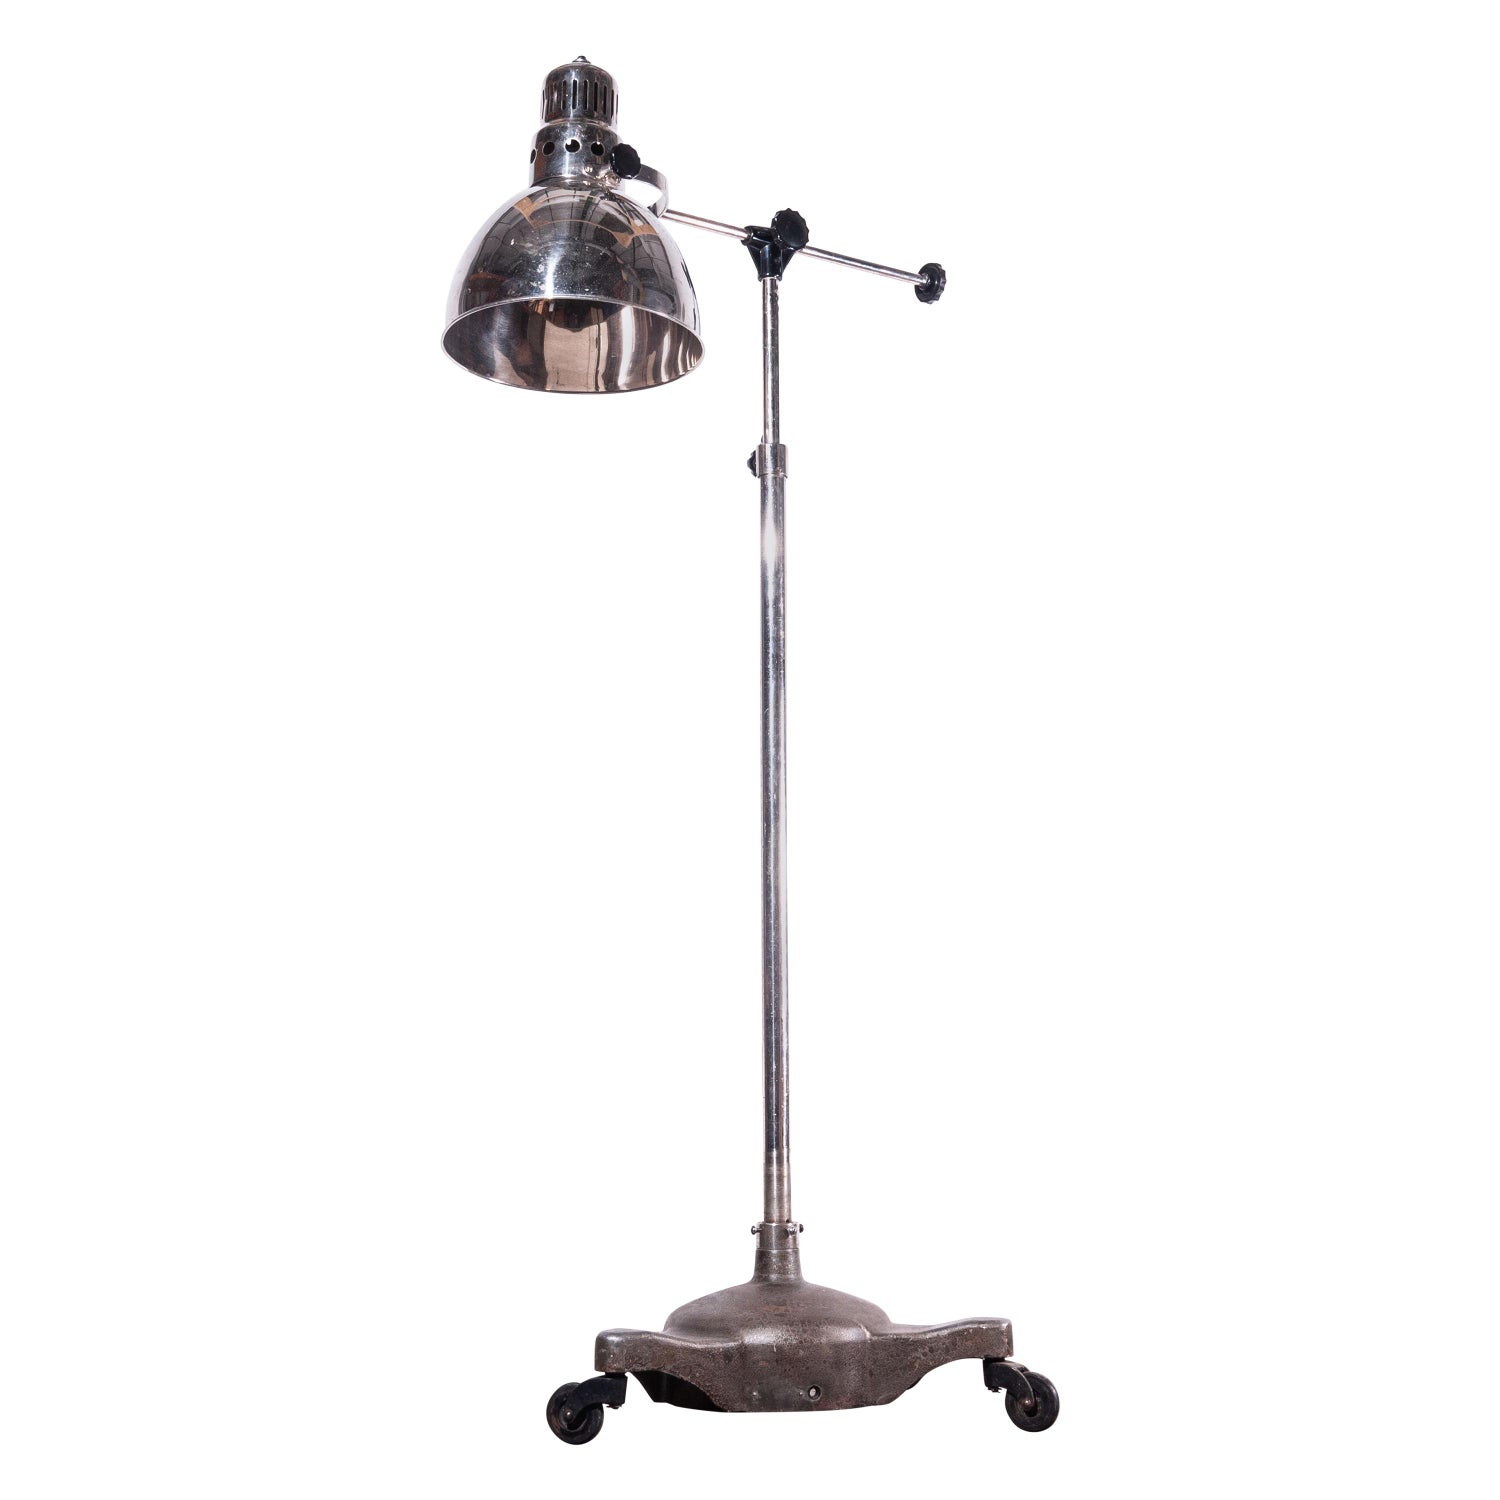 Sold at Auction: Vintage Modern Industrial LV-PA Dual Floor Lamp